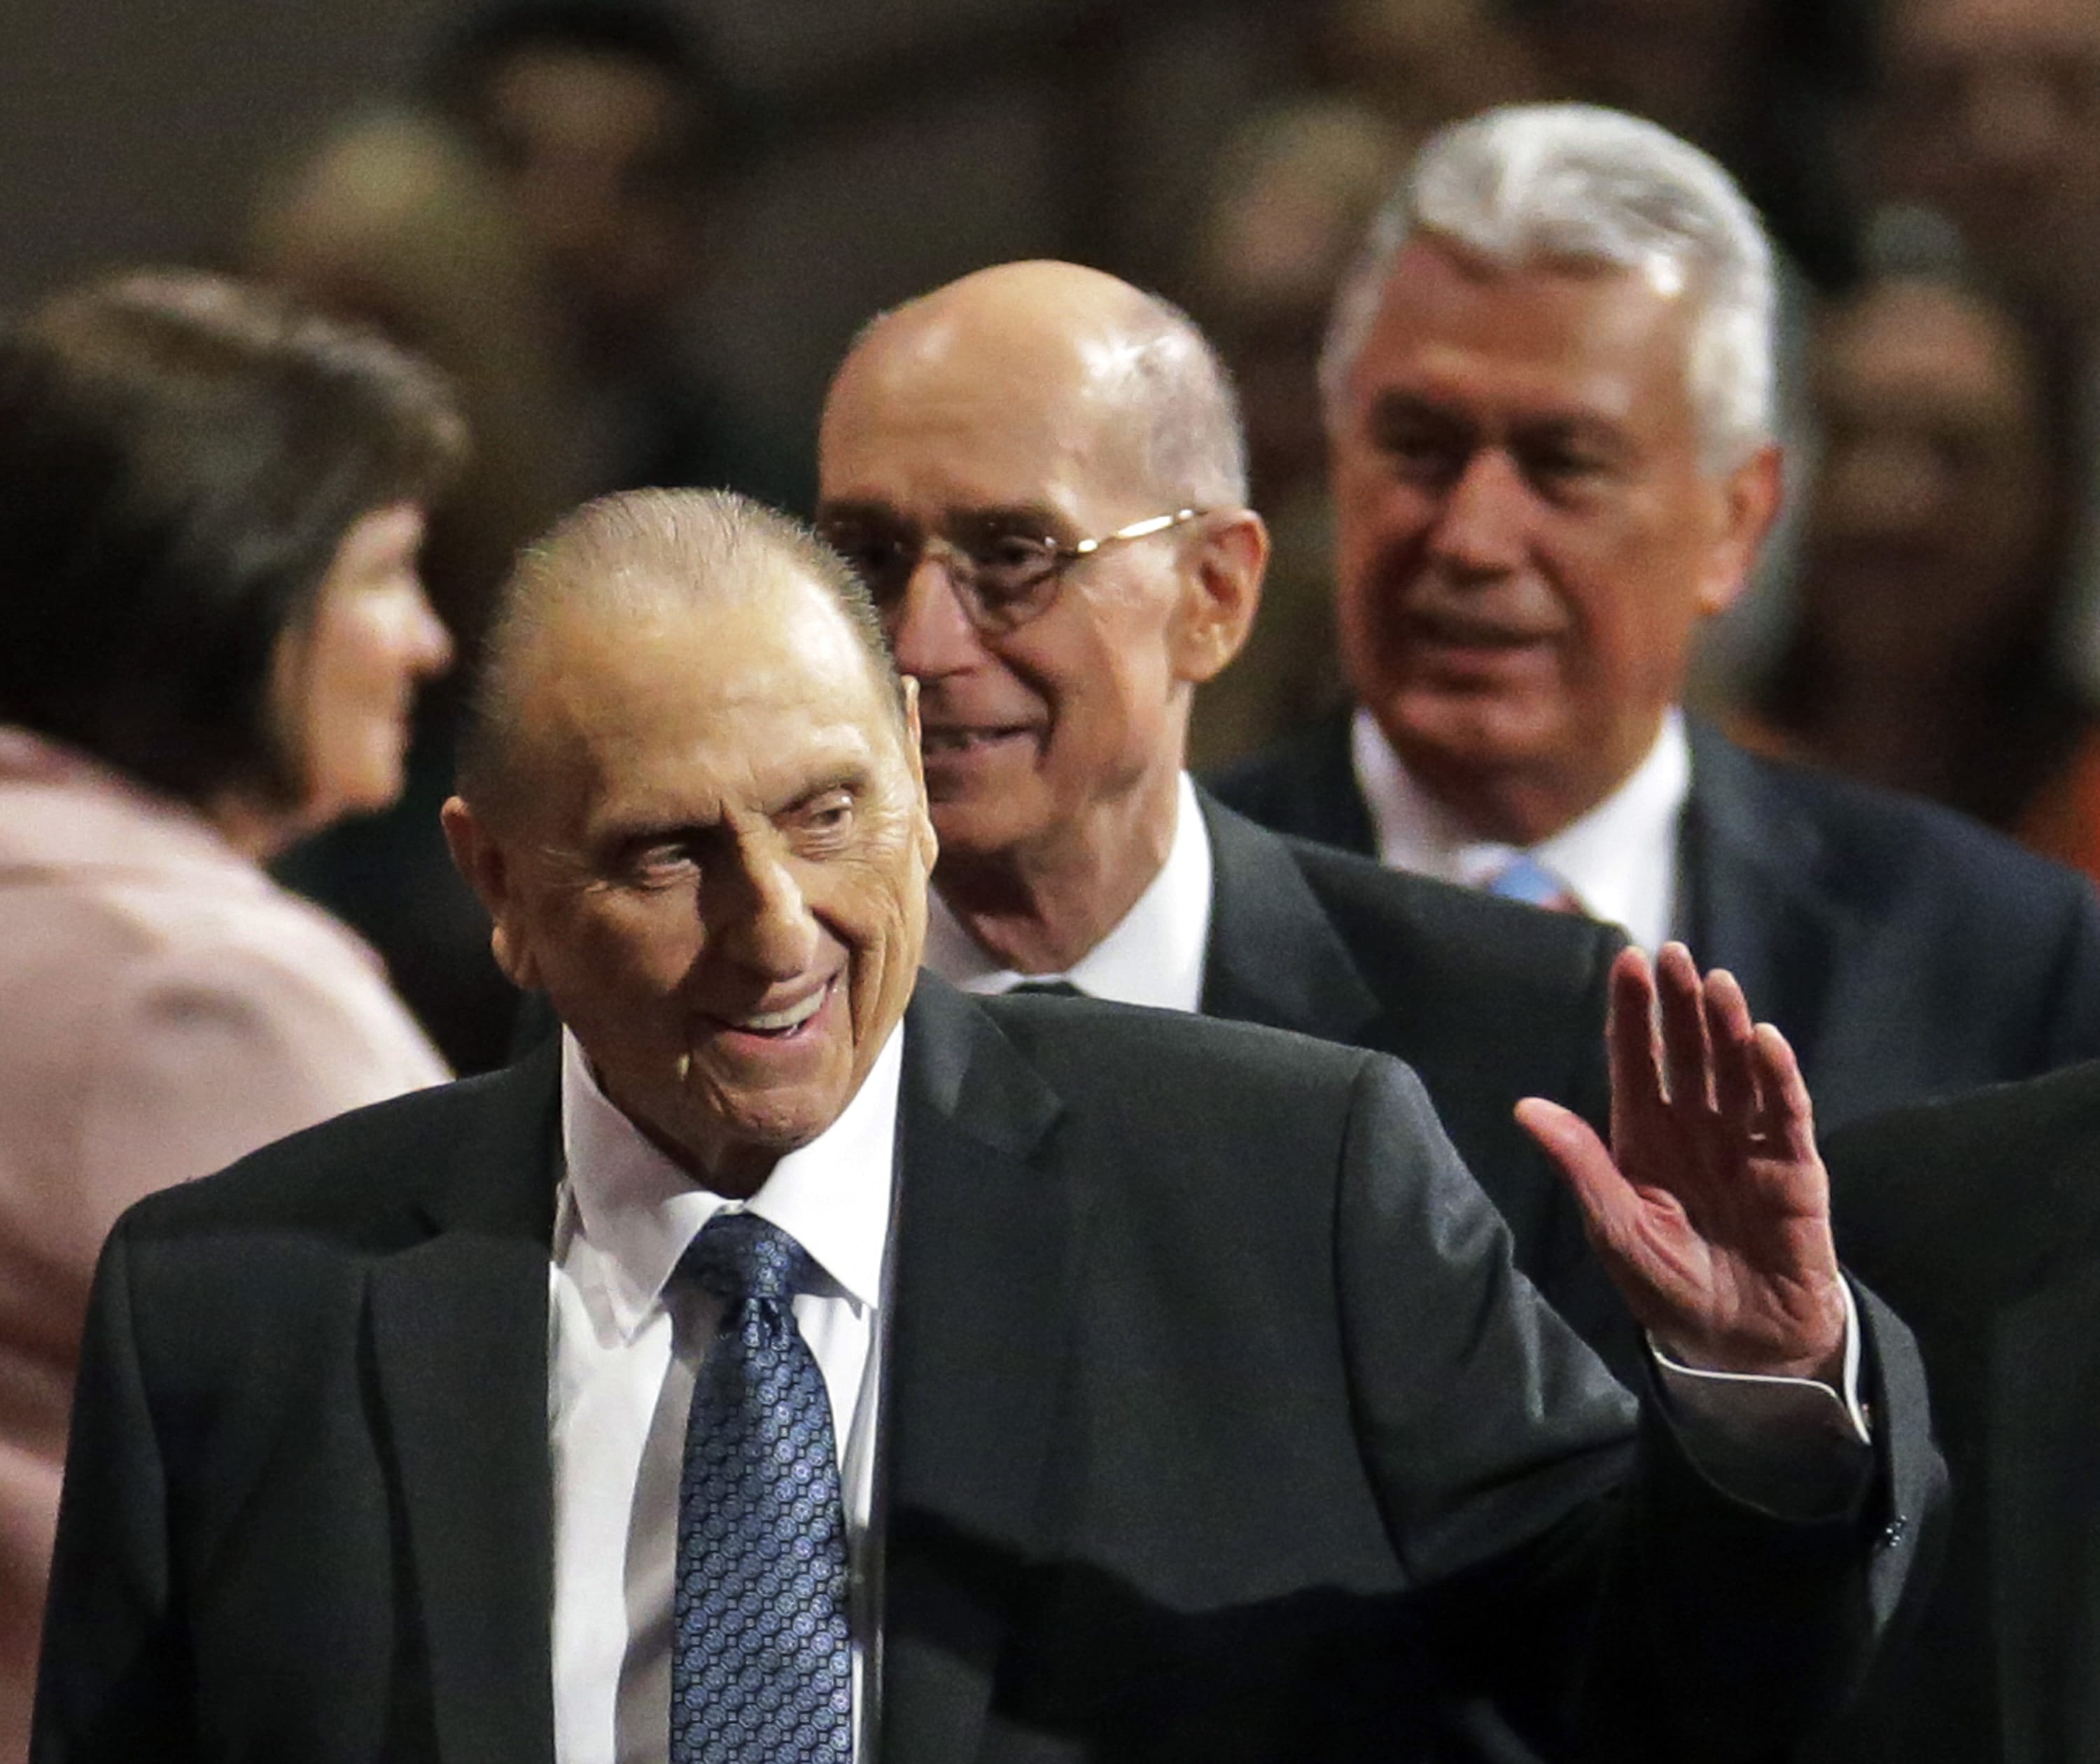 President Thomas S. Monson, of The Church of Jesus Christ of Latter-day Saints, waves to the audience during the opening session of the Mormon church conference in Salt Lake City in 2015. Monson, the 16th president of the Mormon church, died after nine years in office. He was 90.